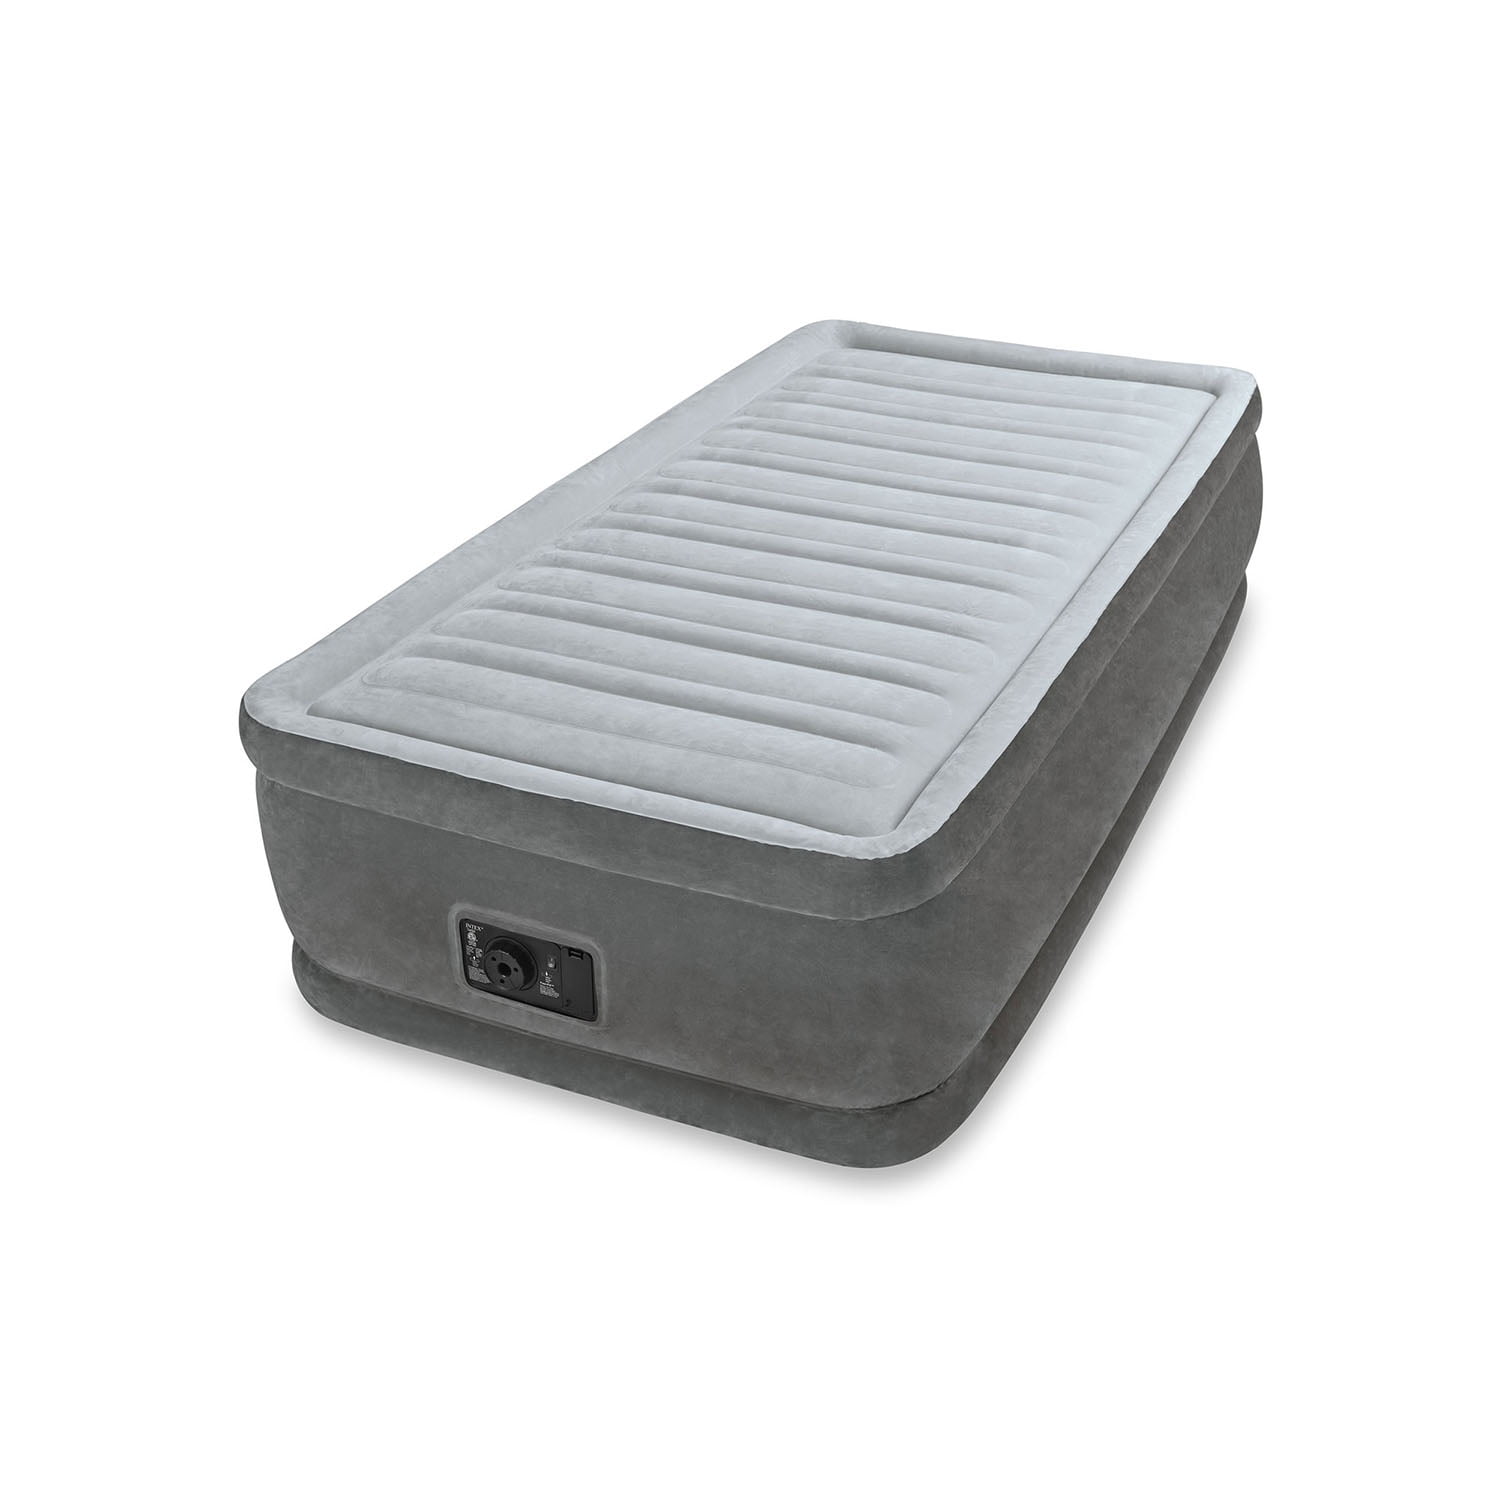 Aerobed Luxury 12 In Air Mattress Built, Aerobed Extra Twin Size Bed In Grey Blue